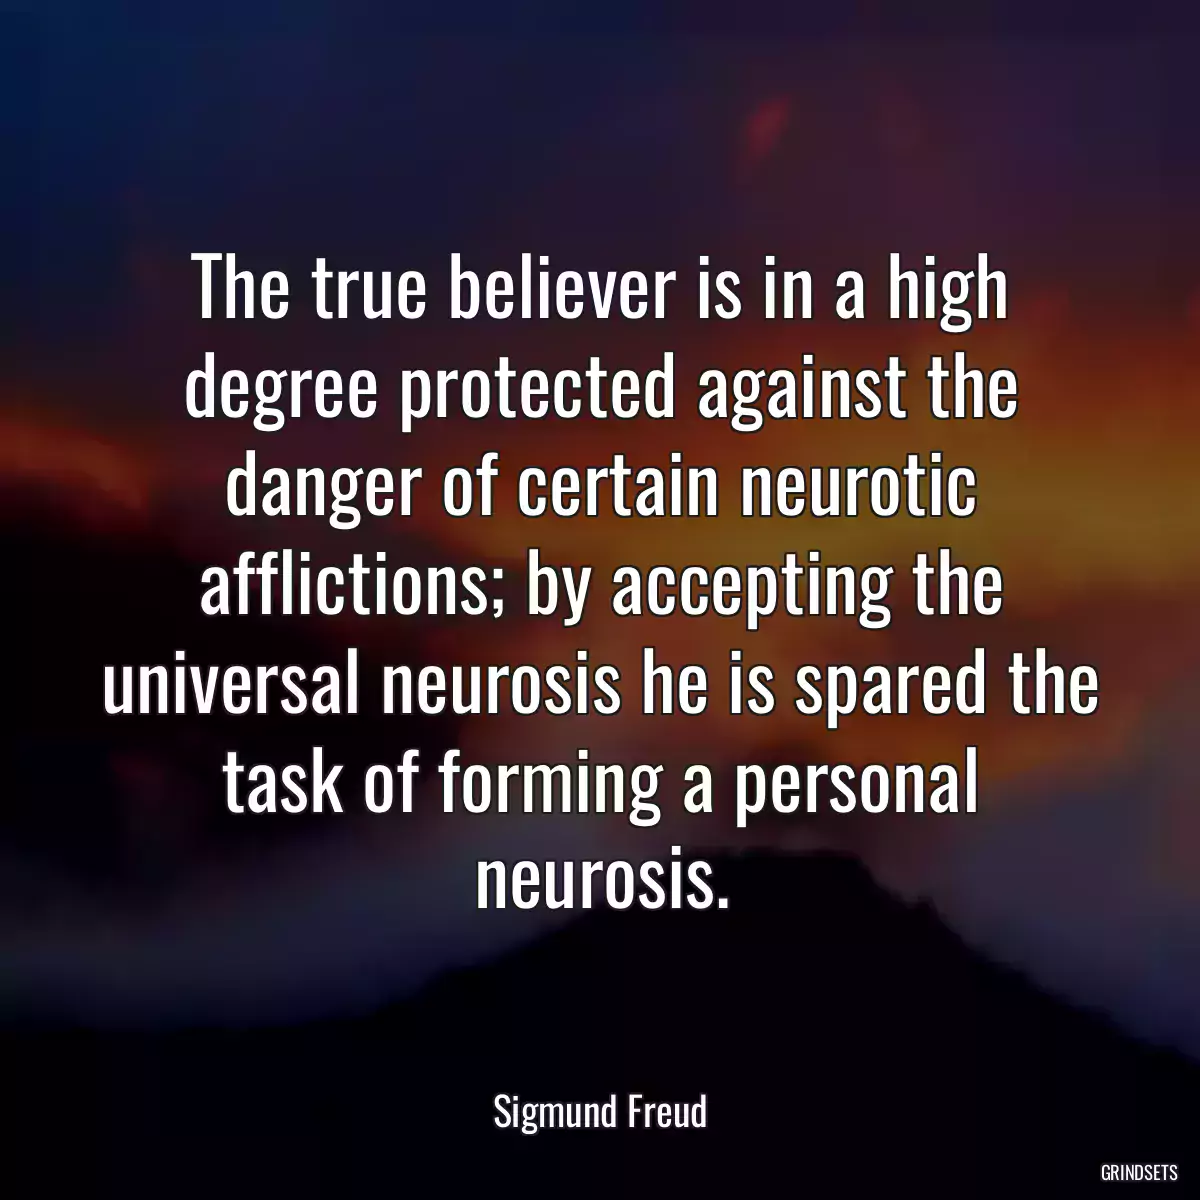 The true believer is in a high degree protected against the danger of certain neurotic afflictions; by accepting the universal neurosis he is spared the task of forming a personal neurosis.